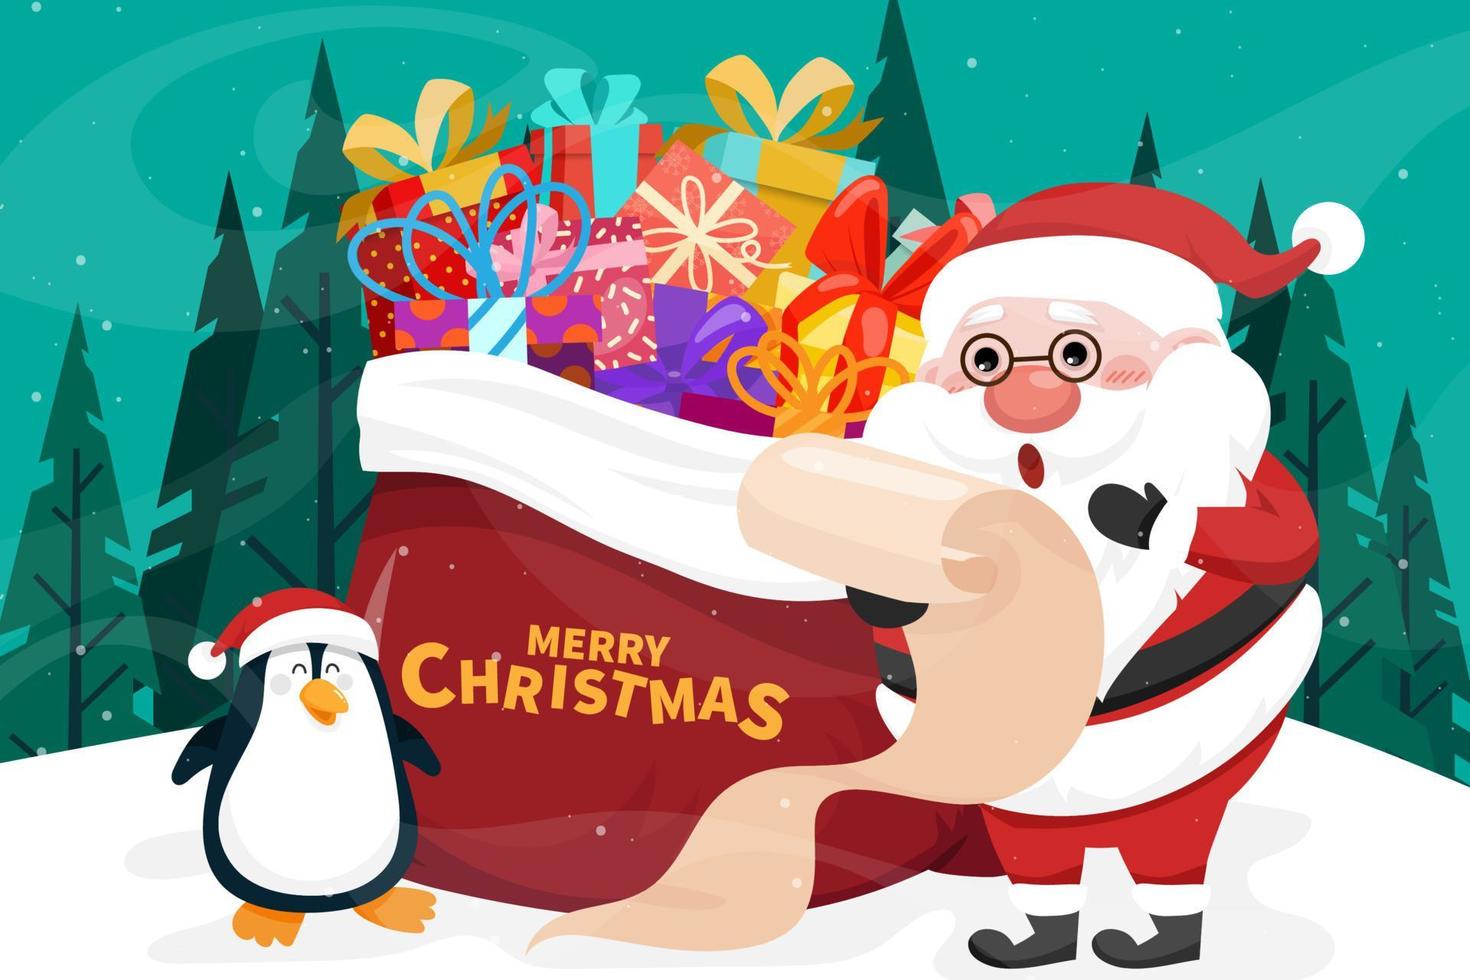 Merry christmas card with santa claus and gift box vector